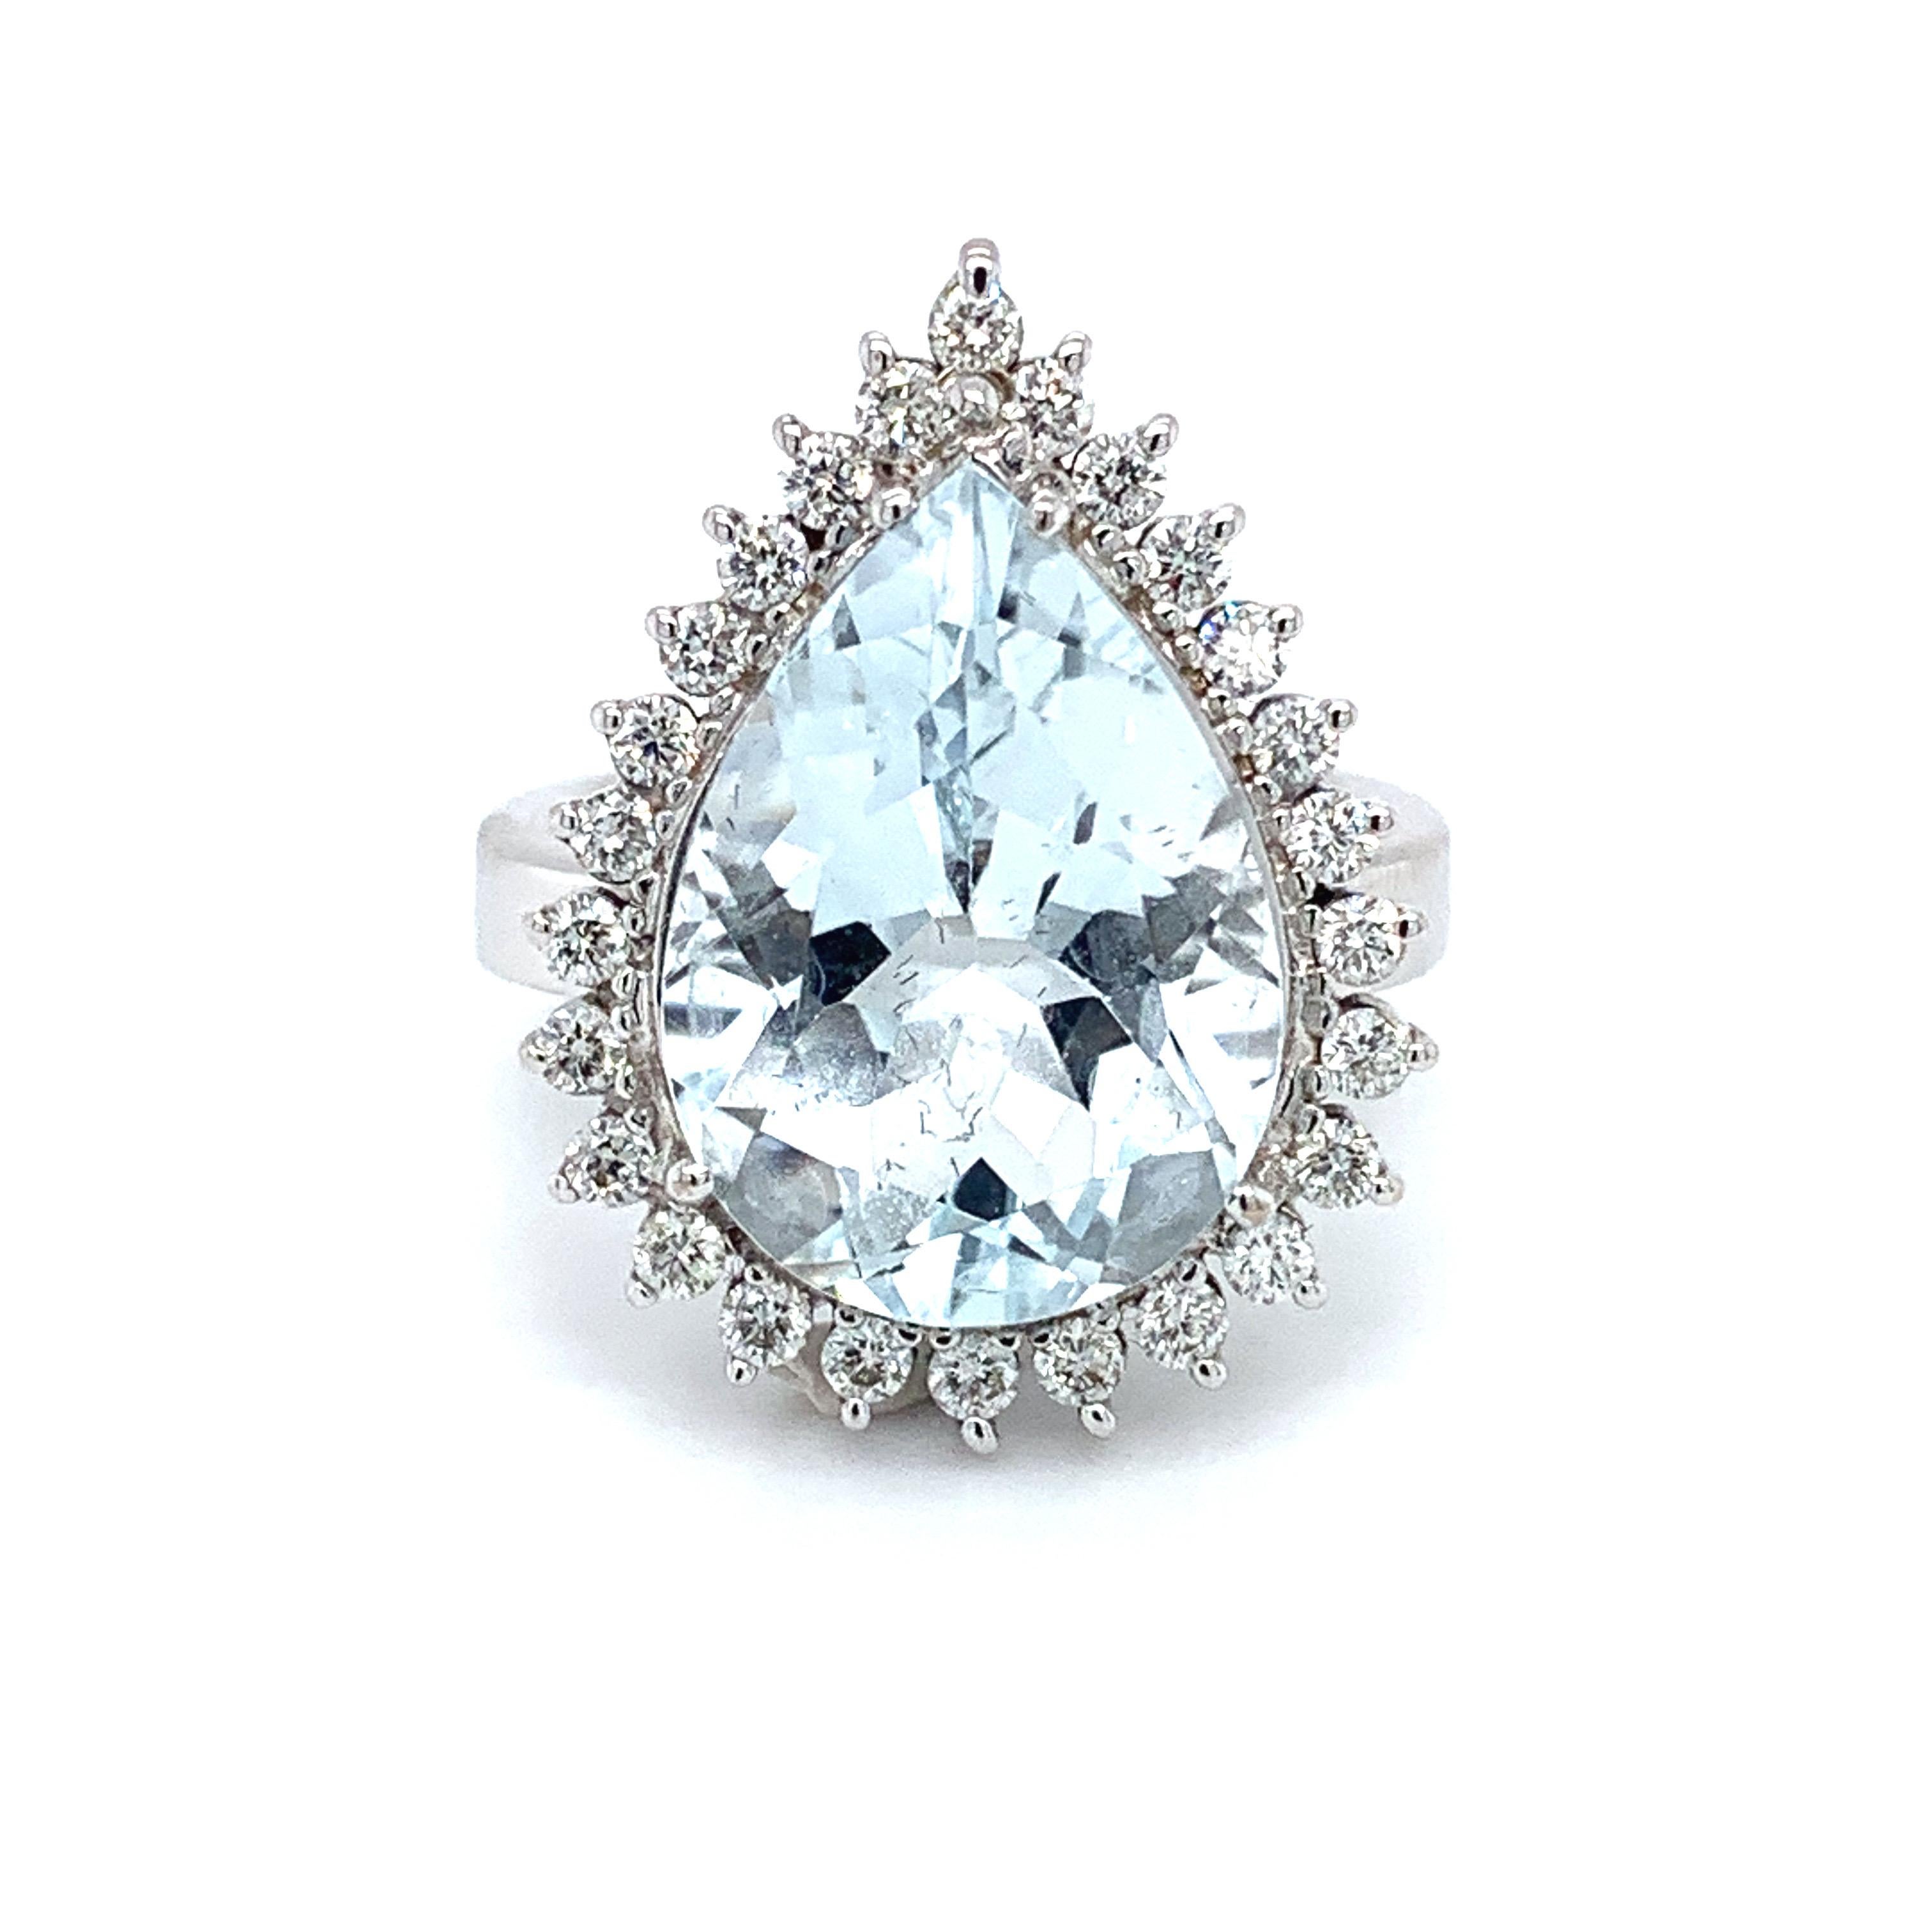 12.00ct Aquamarine Diamond Halo Cluster Cocktail Ring 18K White Gold For Sale 2